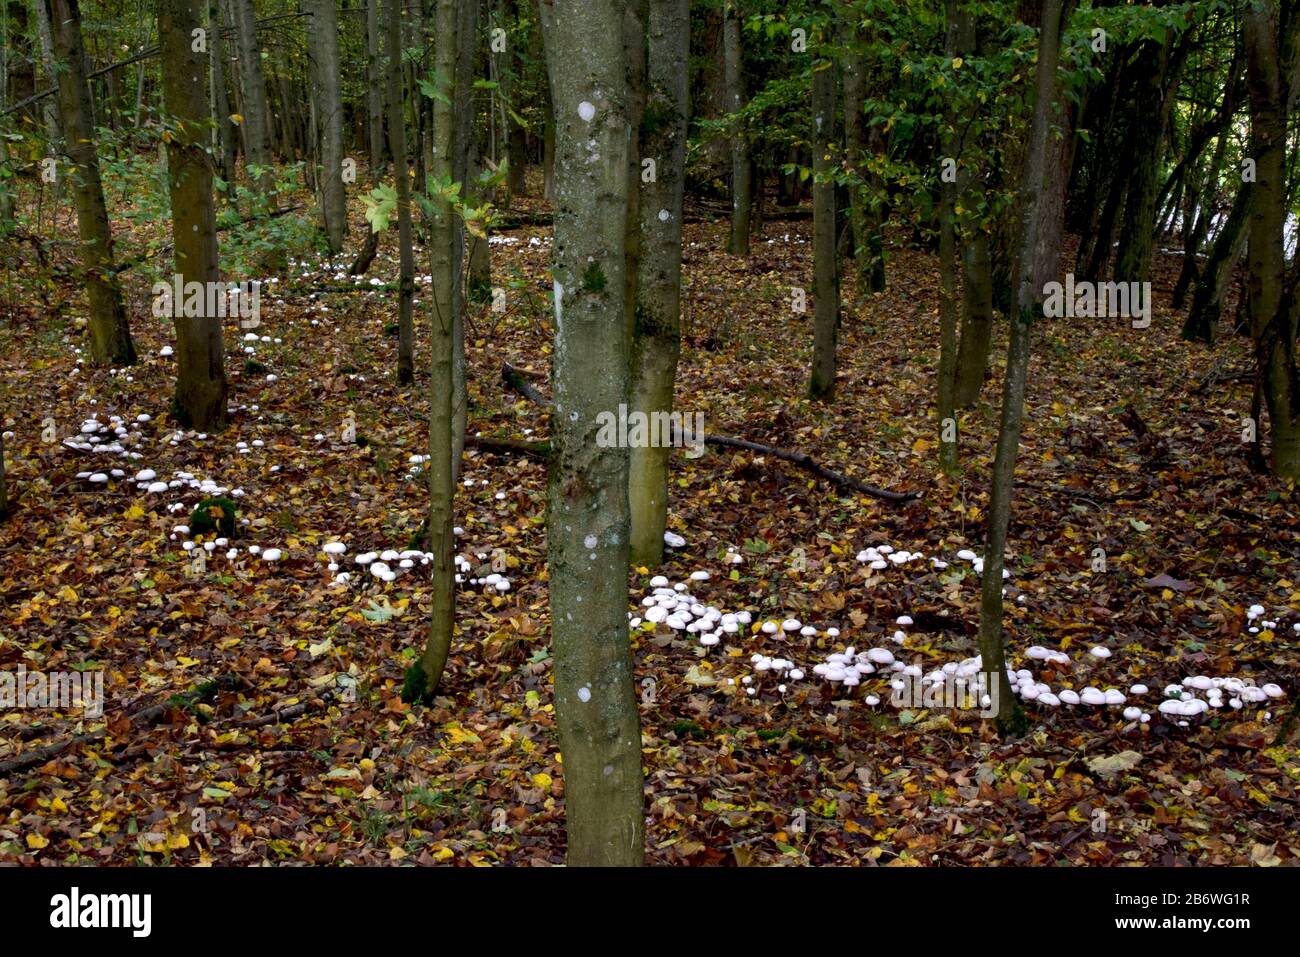 Yellow-Staining Mushroom, Yellow Stainer (Agaricus xanthoderma). Fungi in a forest, forming a fairy ring. Germany Stock Photo